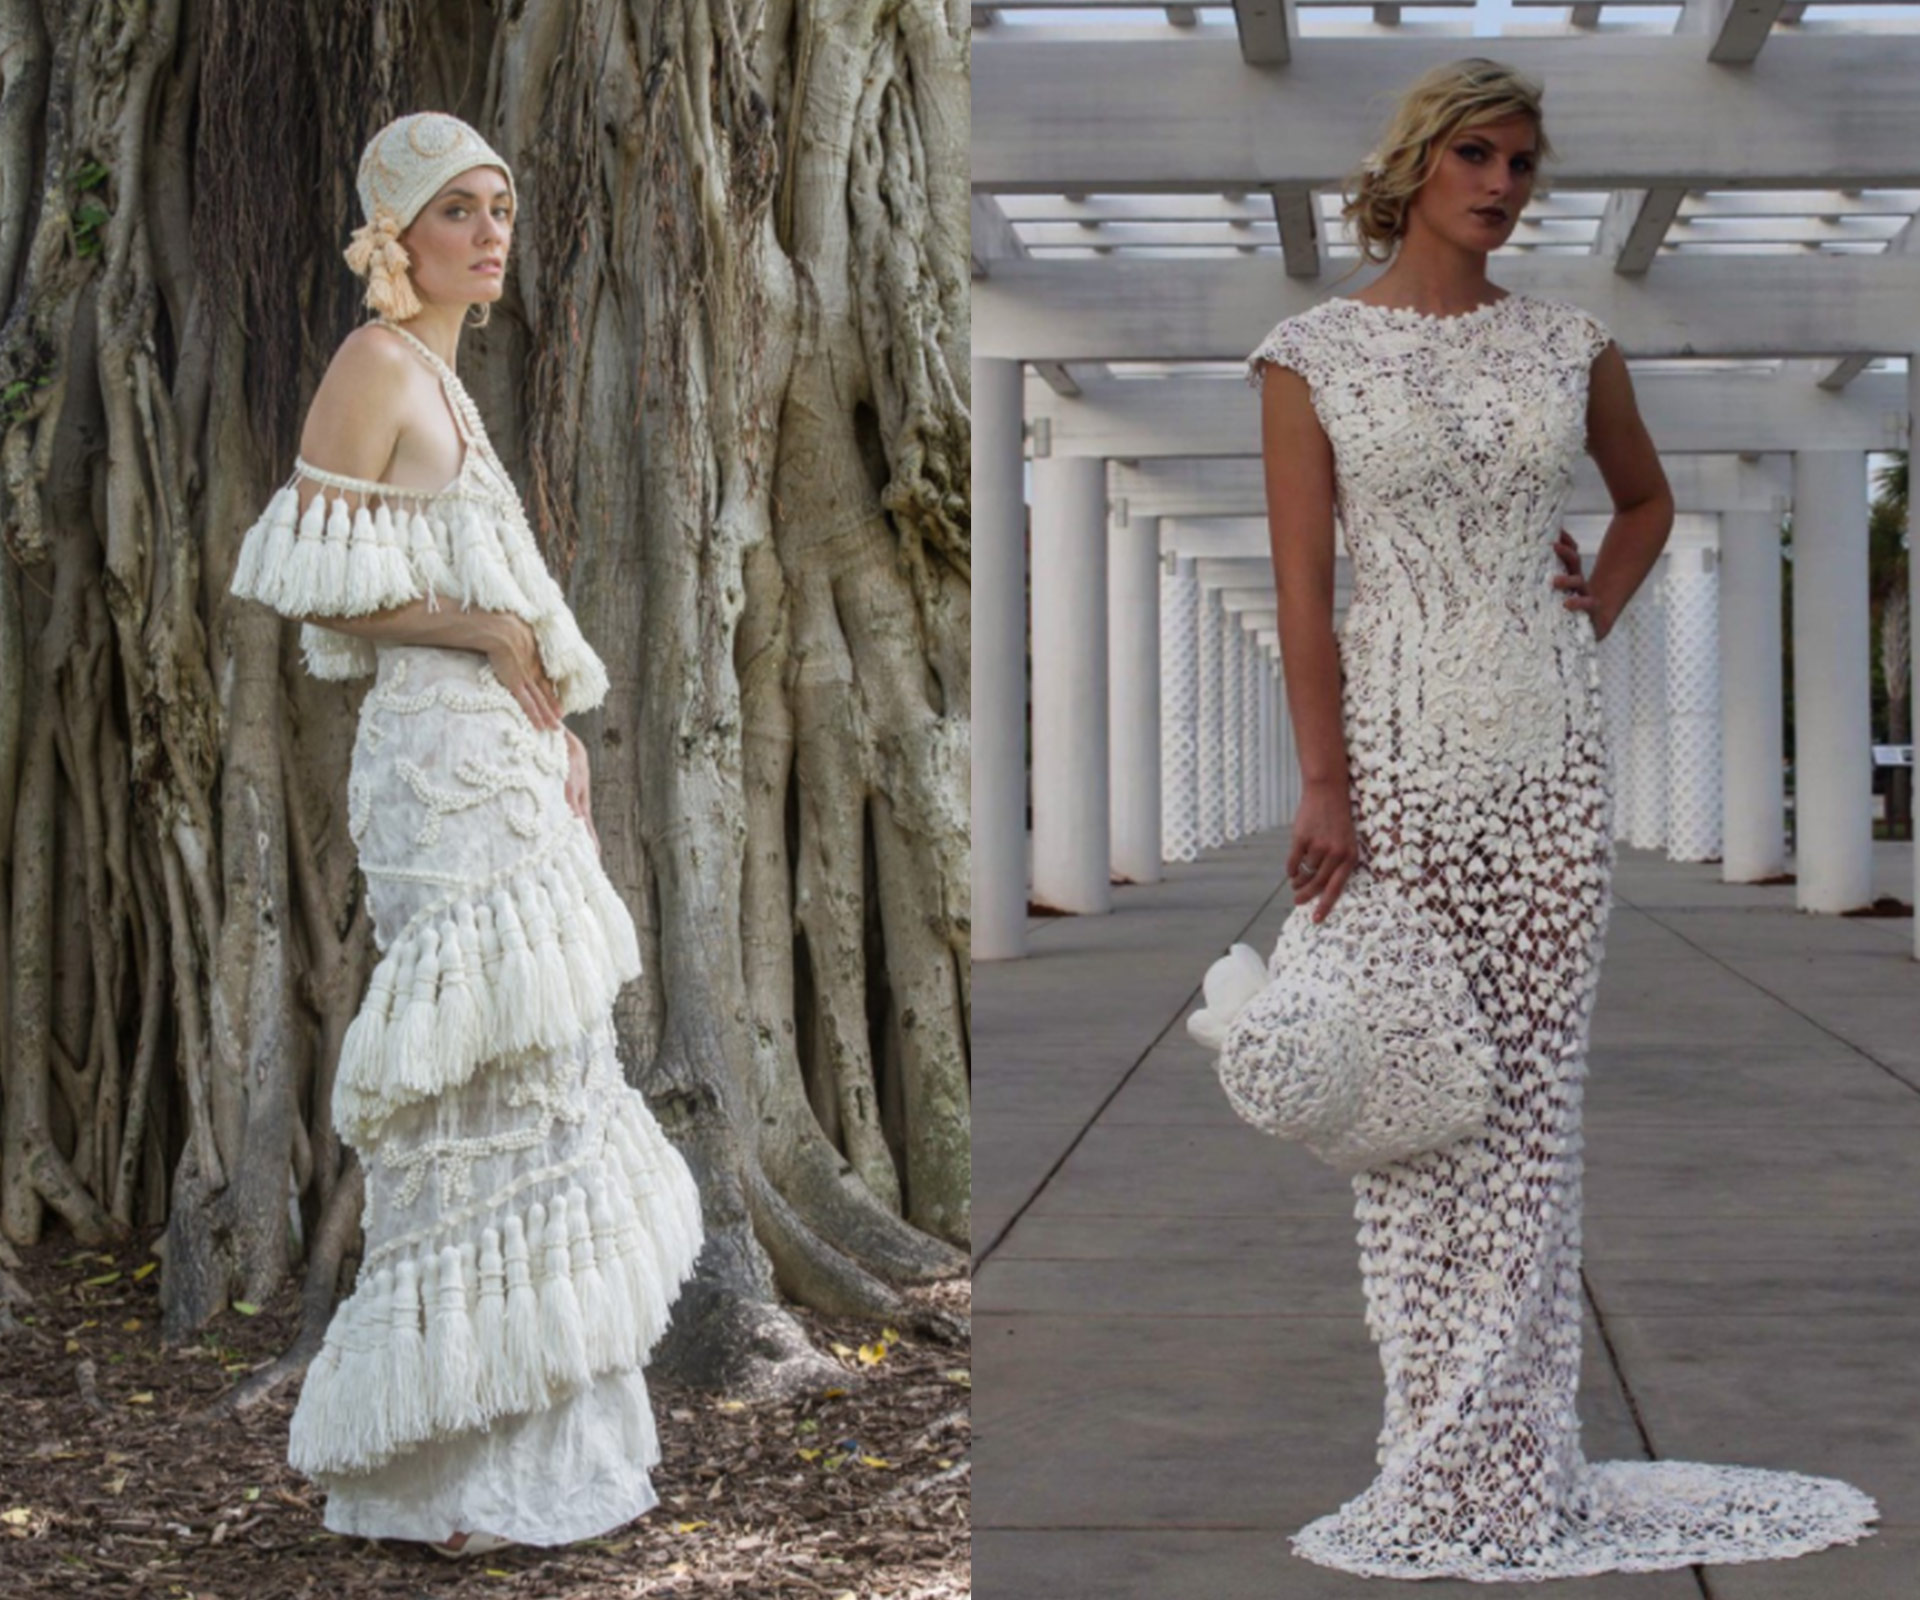 Would you believe that these beautiful wedding dresses are made from toilet paper?